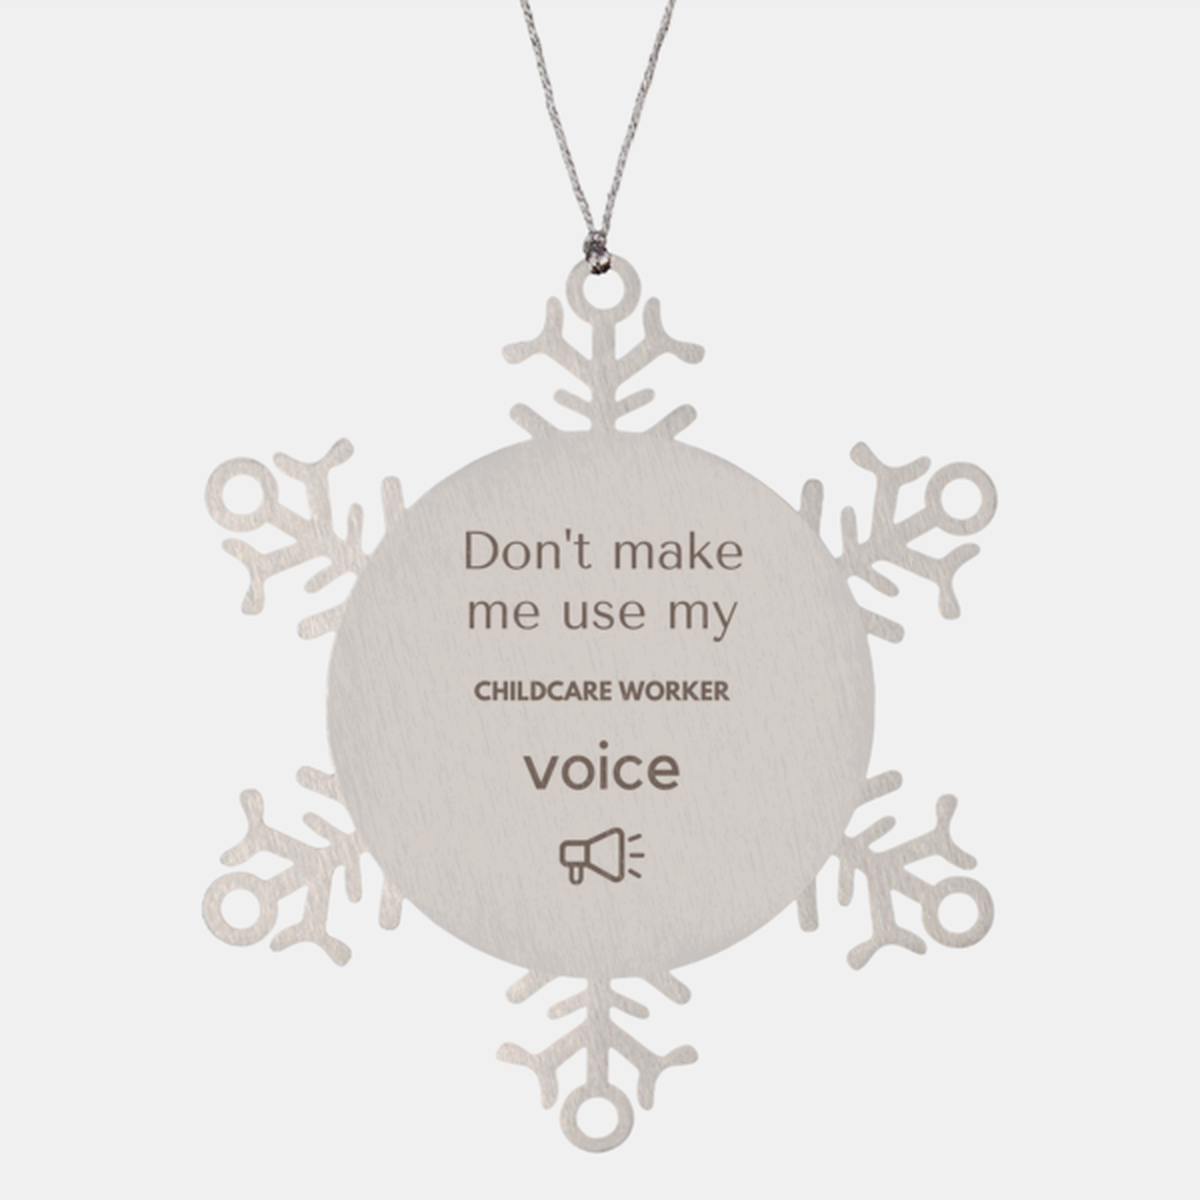 Don't make me use my Childcare Worker voice, Sarcasm Childcare Worker Ornament Gifts, Christmas Childcare Worker Snowflake Ornament Unique Gifts For Childcare Worker Coworkers, Men, Women, Colleague, Friends